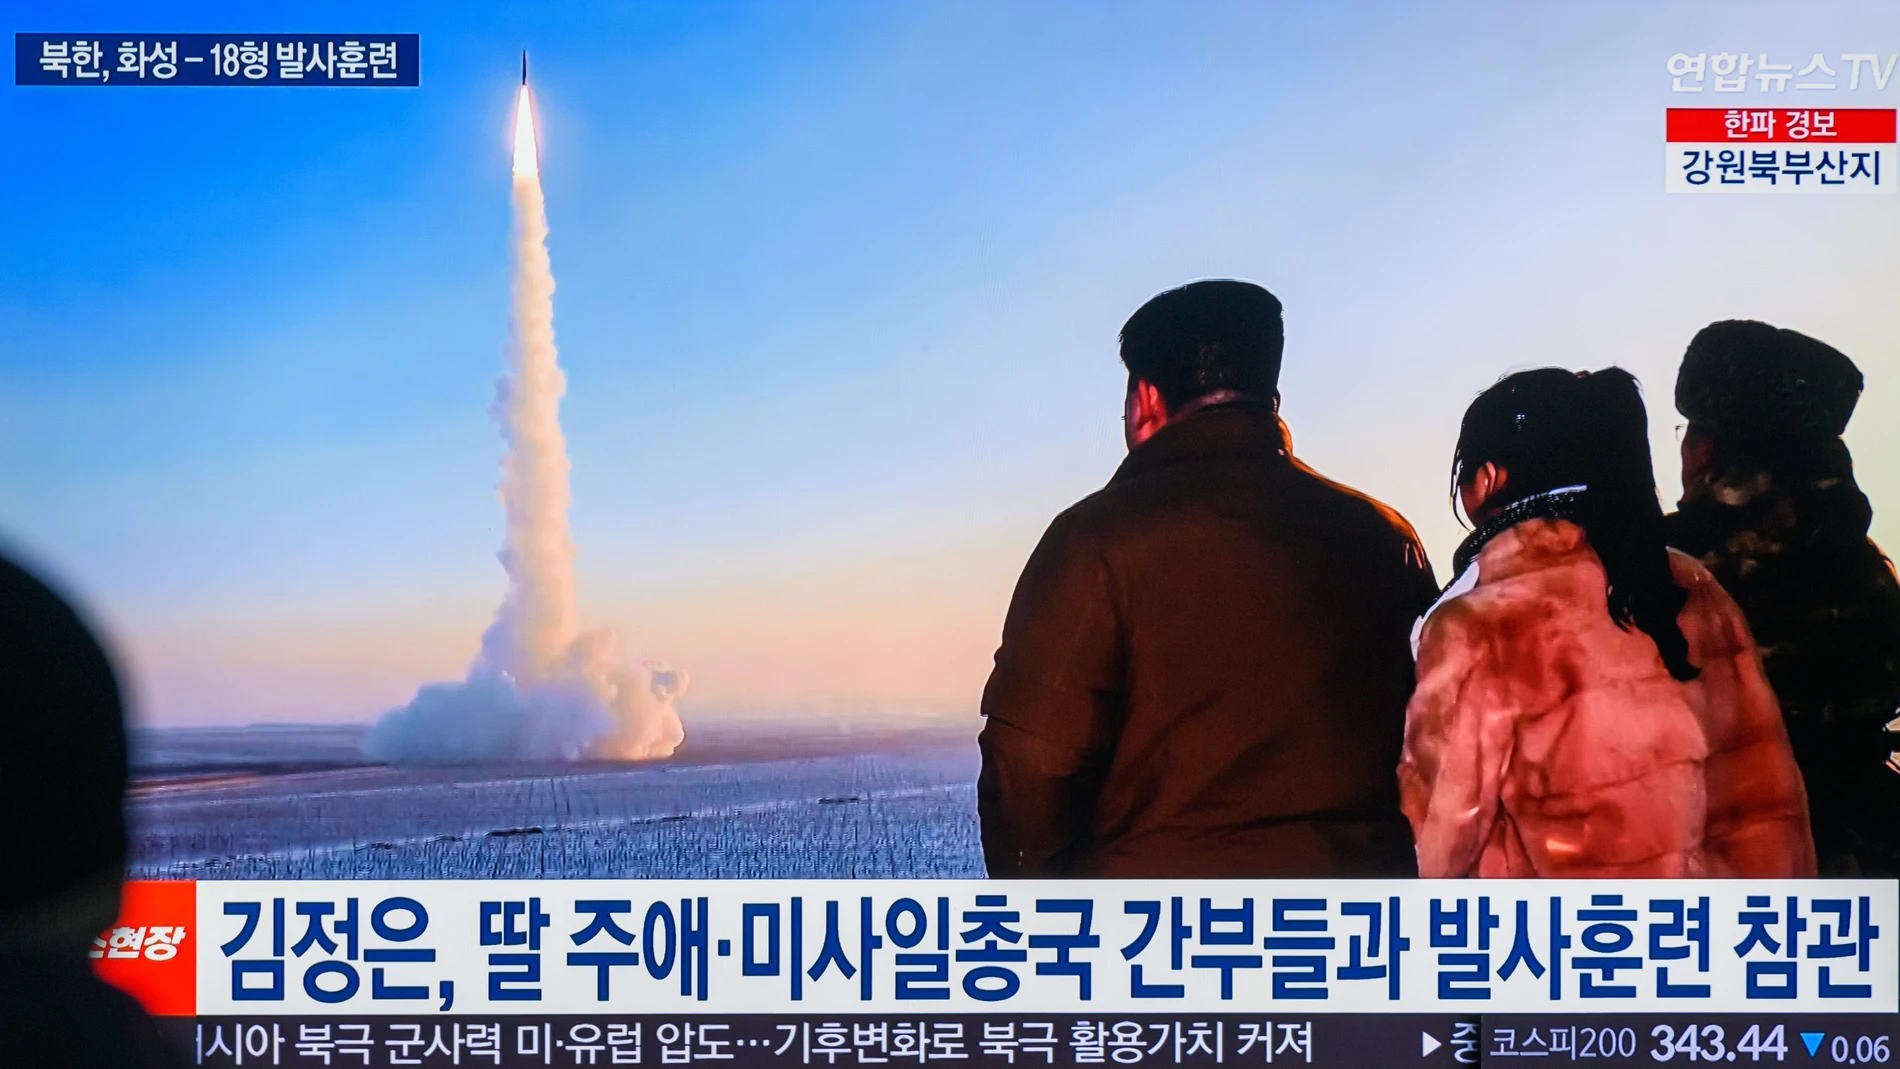 December 19, 2023, Seoul, South Korea: A TV at Seoul's Yongsan Railway Station shows North Korean leader Kim Jong-Un (L) and his daughter believed to be named Kim Ju Ae (2nd from L) inspecting the launch of a Hwasong-18 solid-fuel intercontinental ballistic missile (ICBM). (Foto de ARCHIVO) 19/12/2023